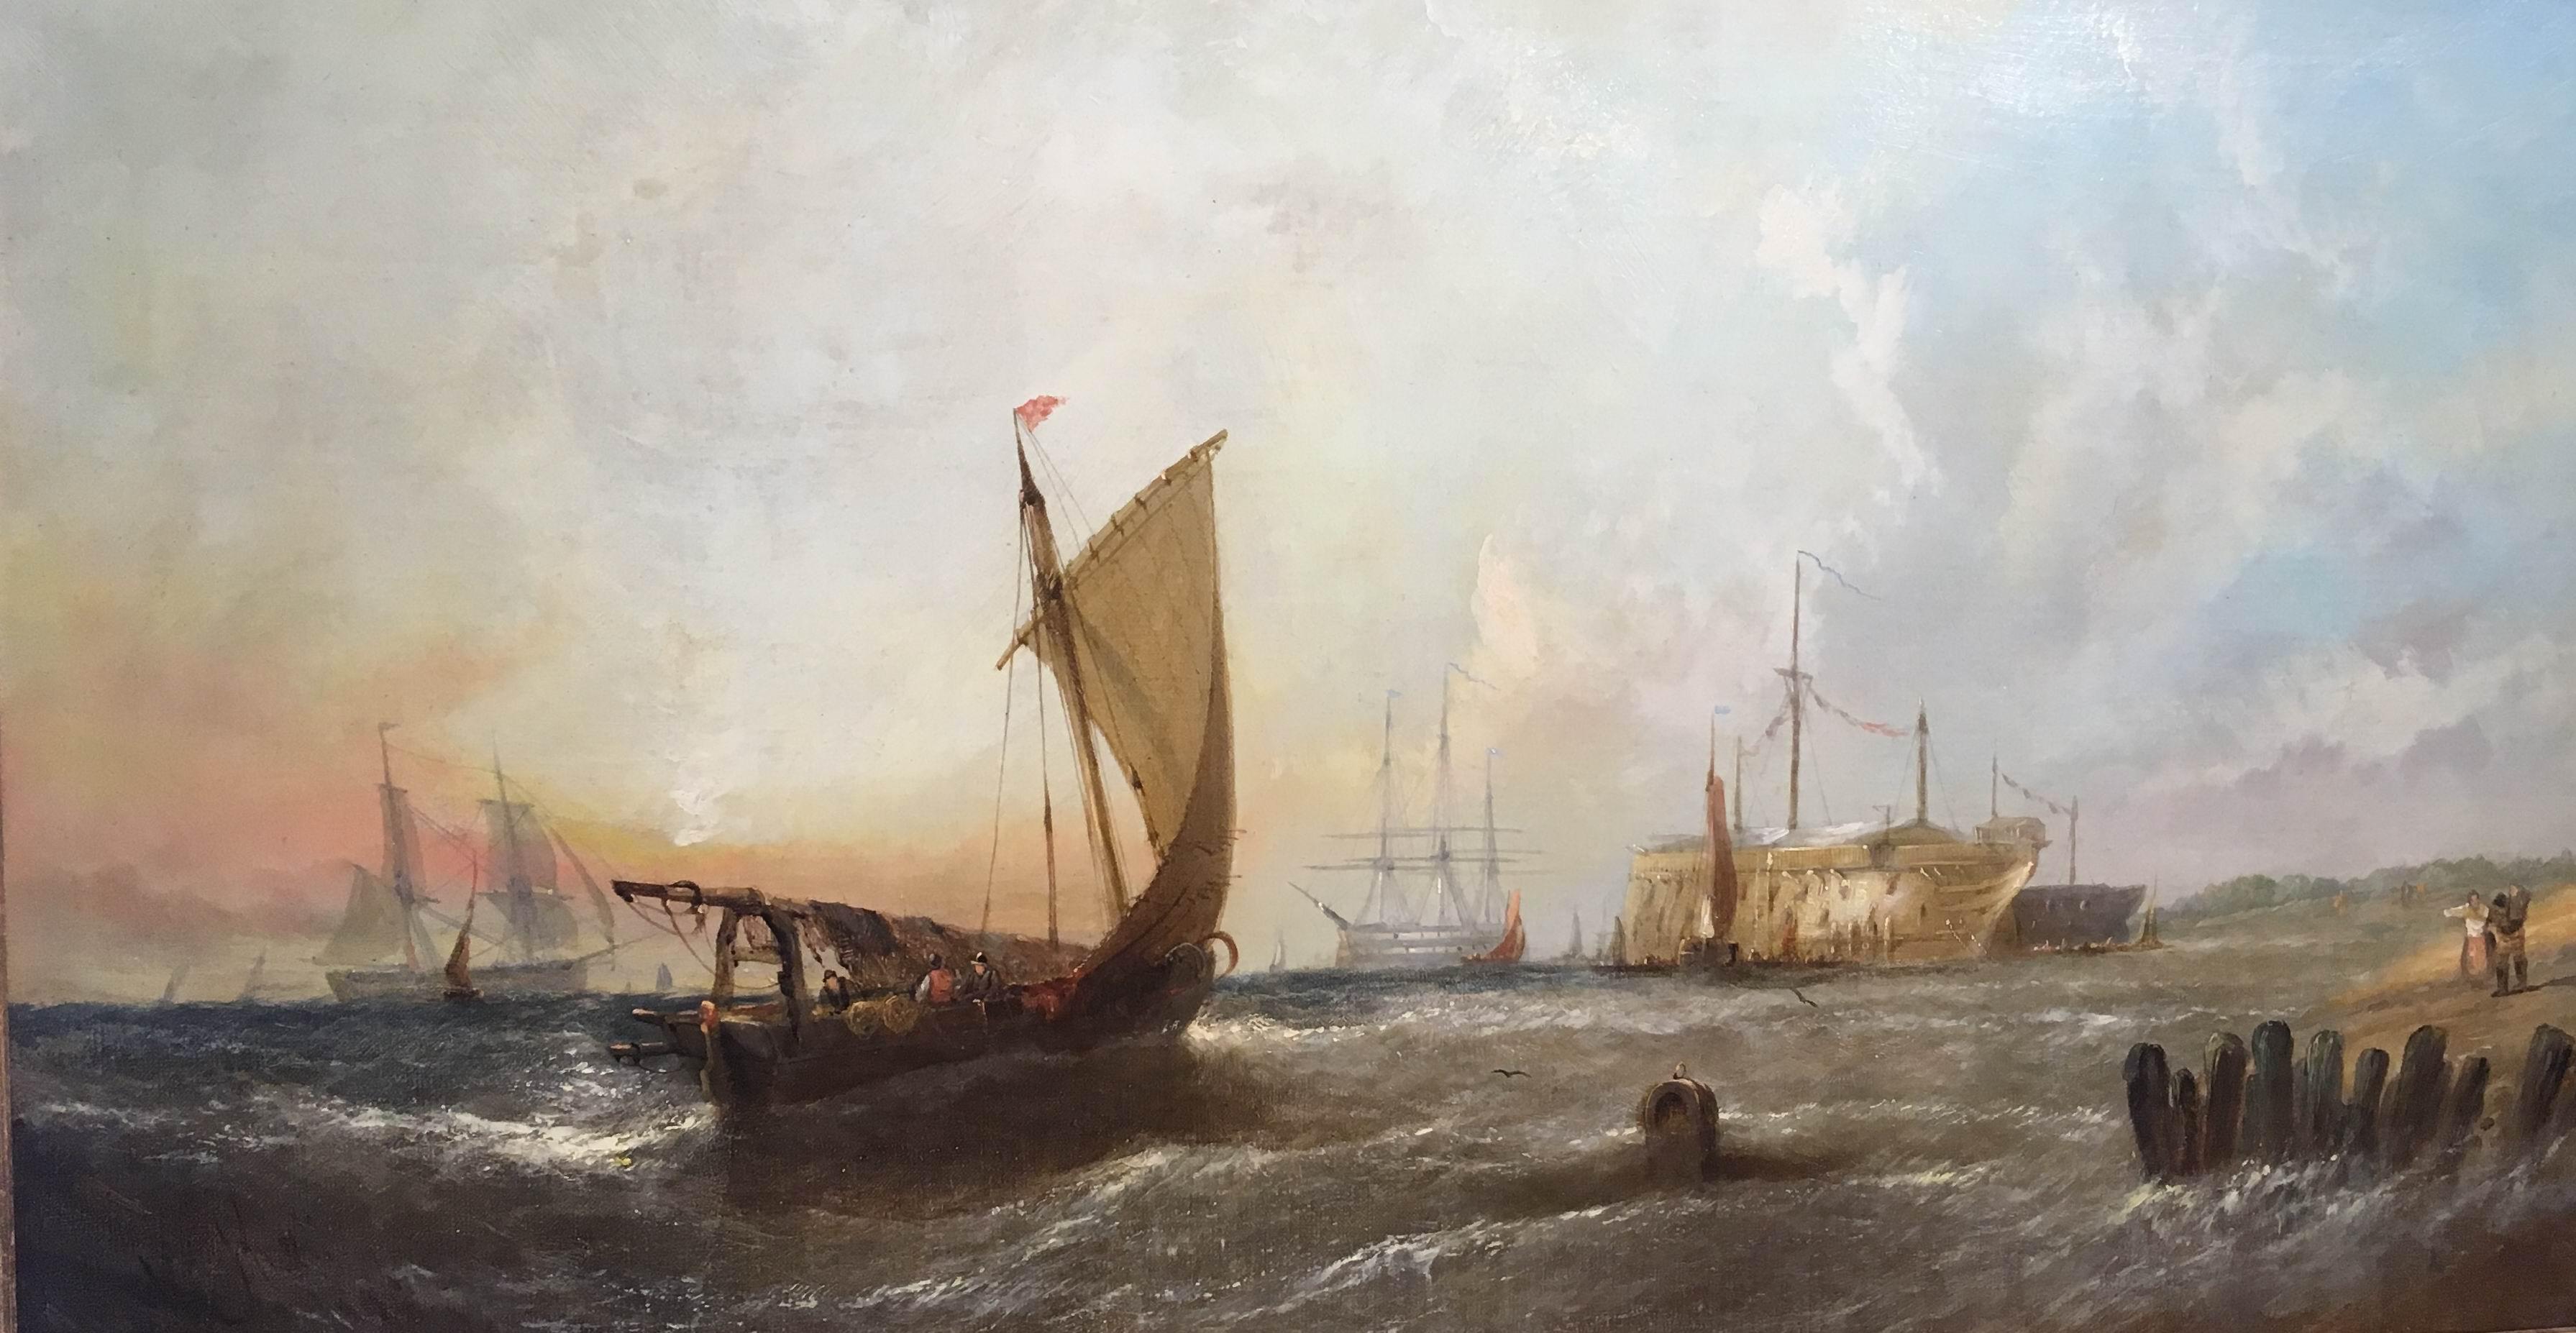 william callcott knell Landscape Painting - "Off portsmouth"